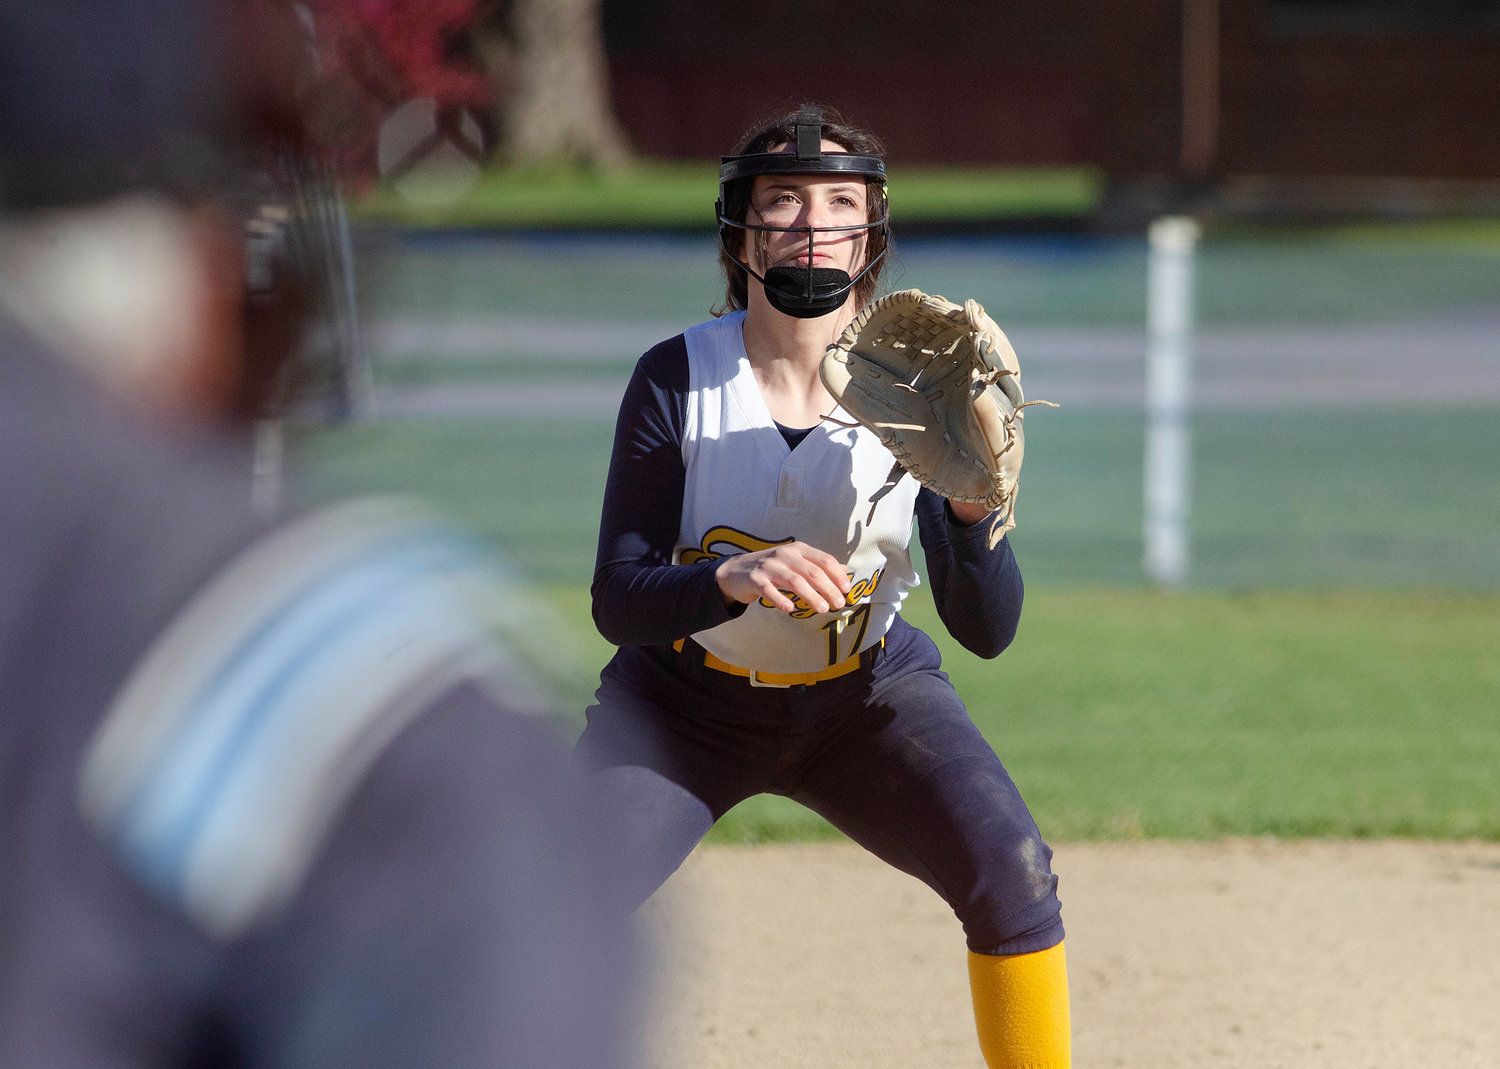 Barrington third baseman Ariana Renzi looks in at the batter as teammate Ace McCoy makes a pitch.